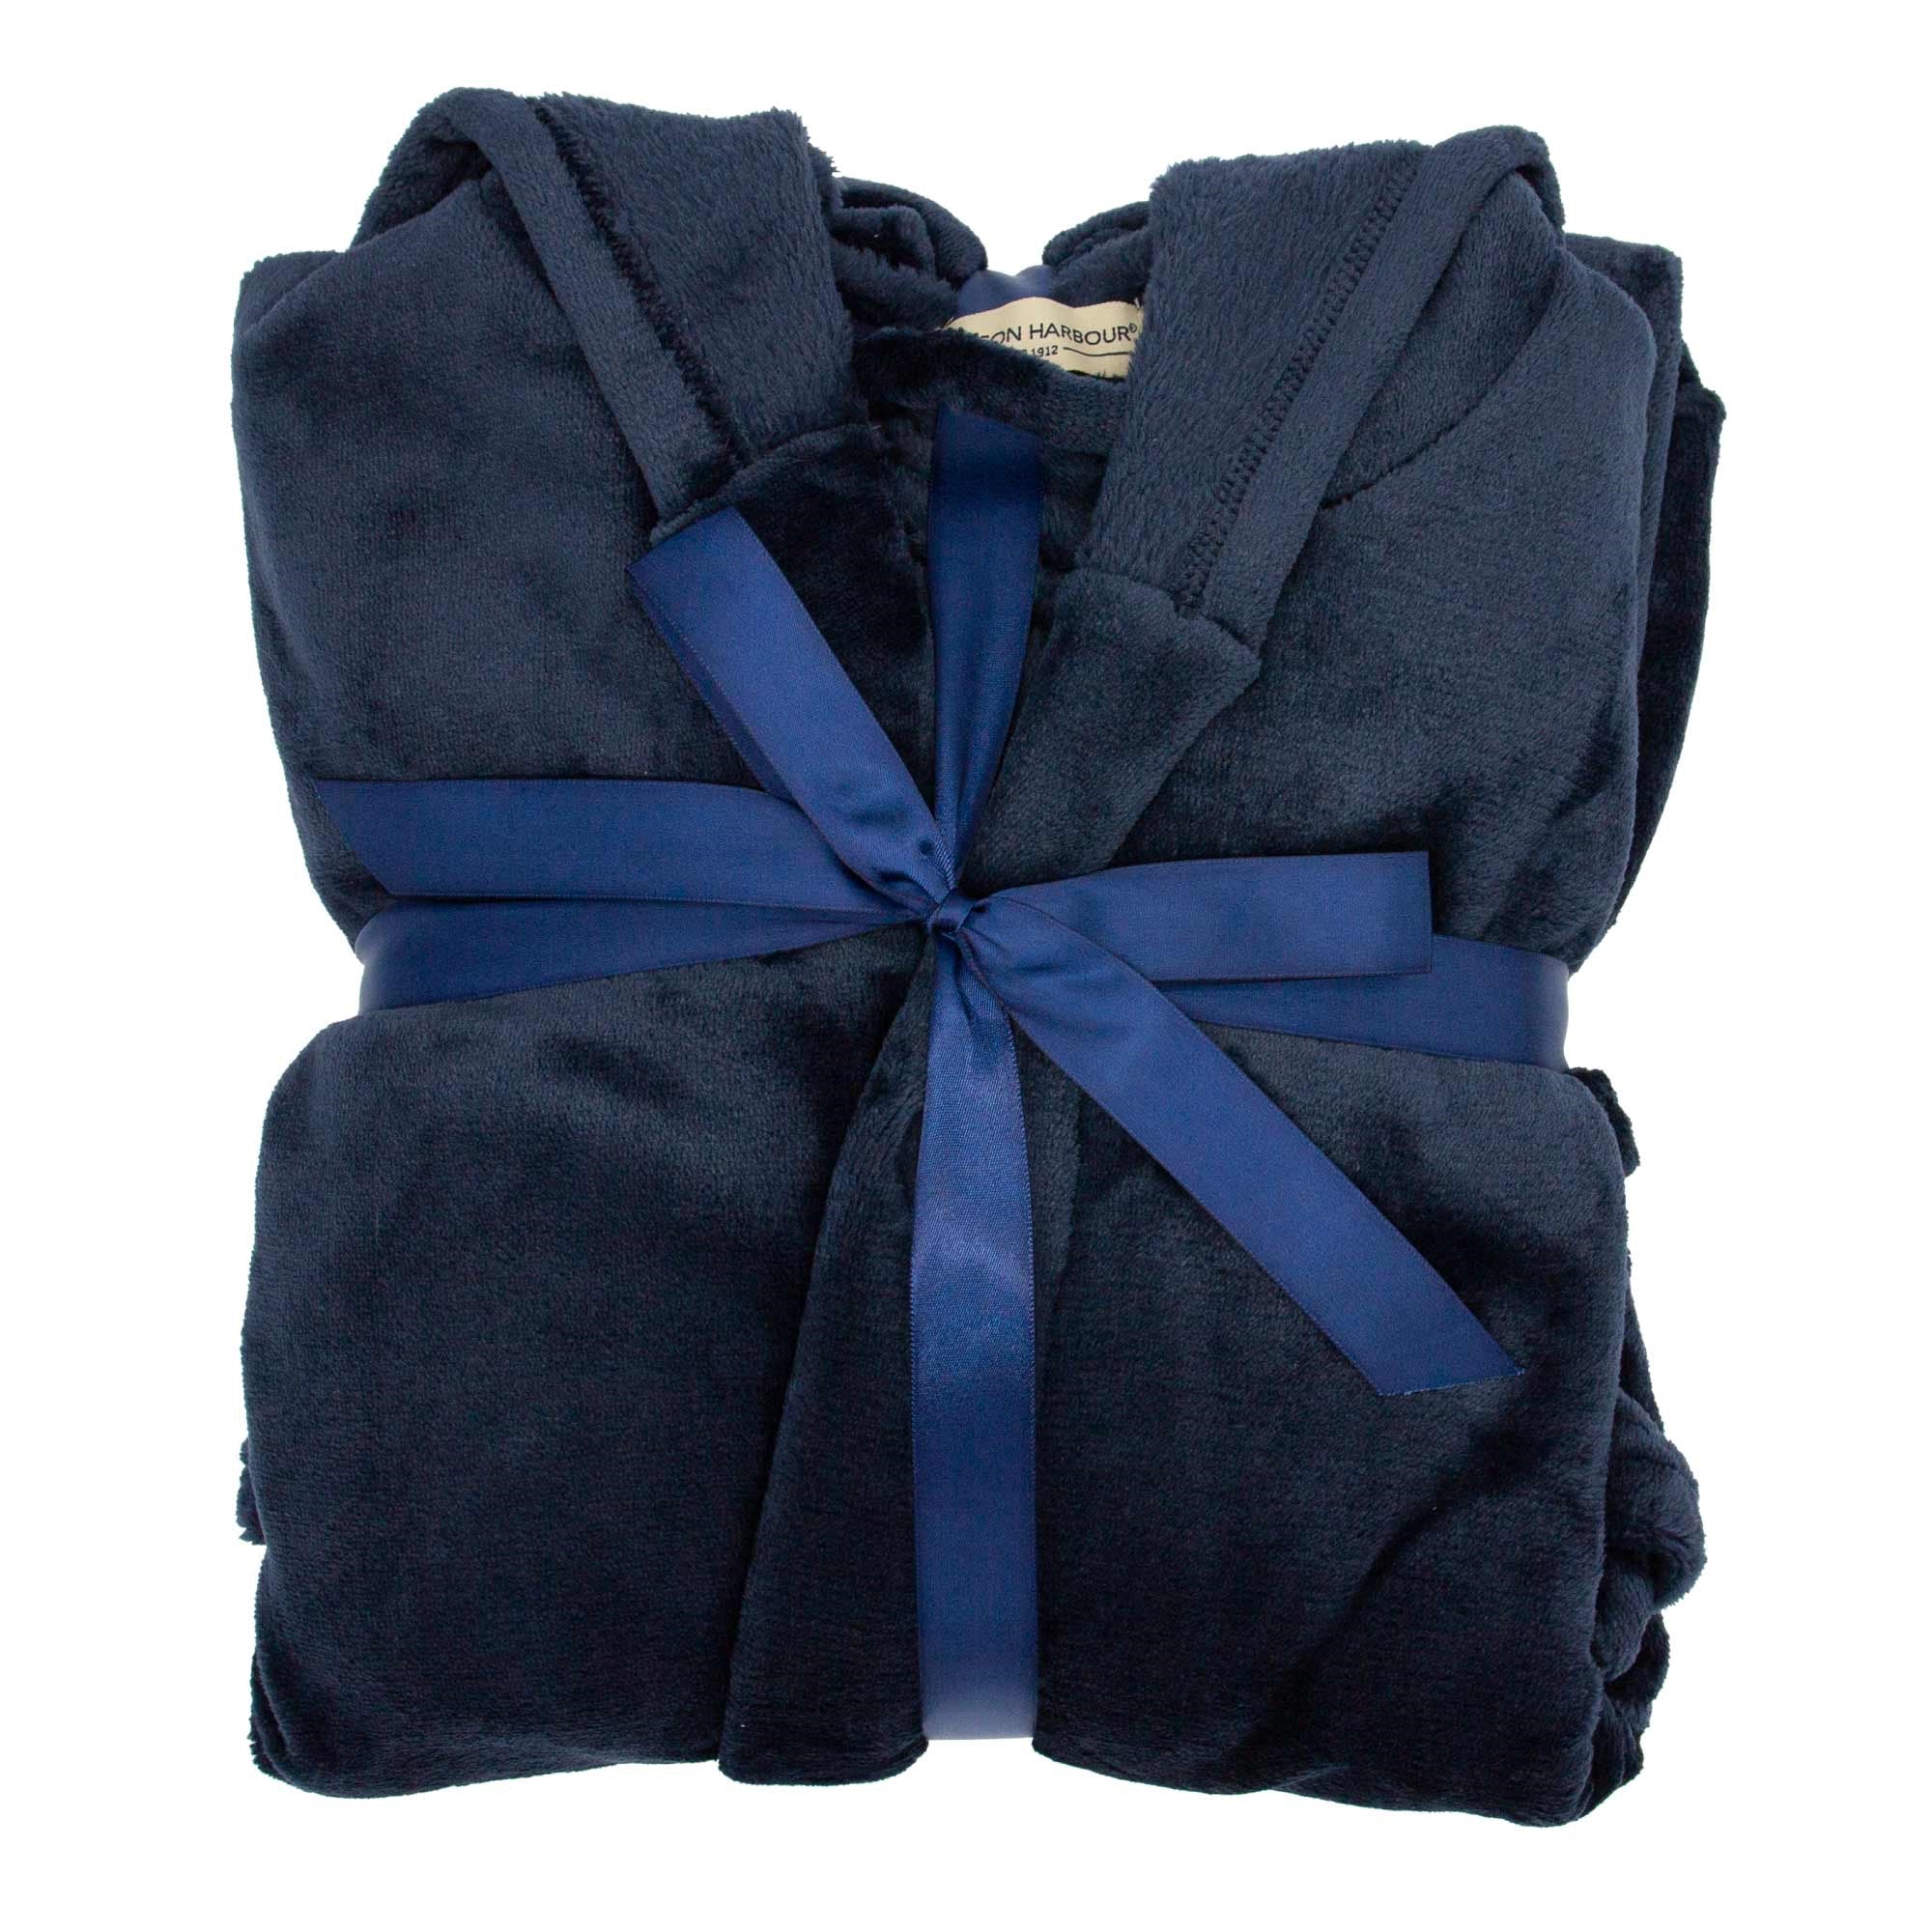 Hutson Harbour Hooded Robe - Navy - LARGE  | TJ Hughes